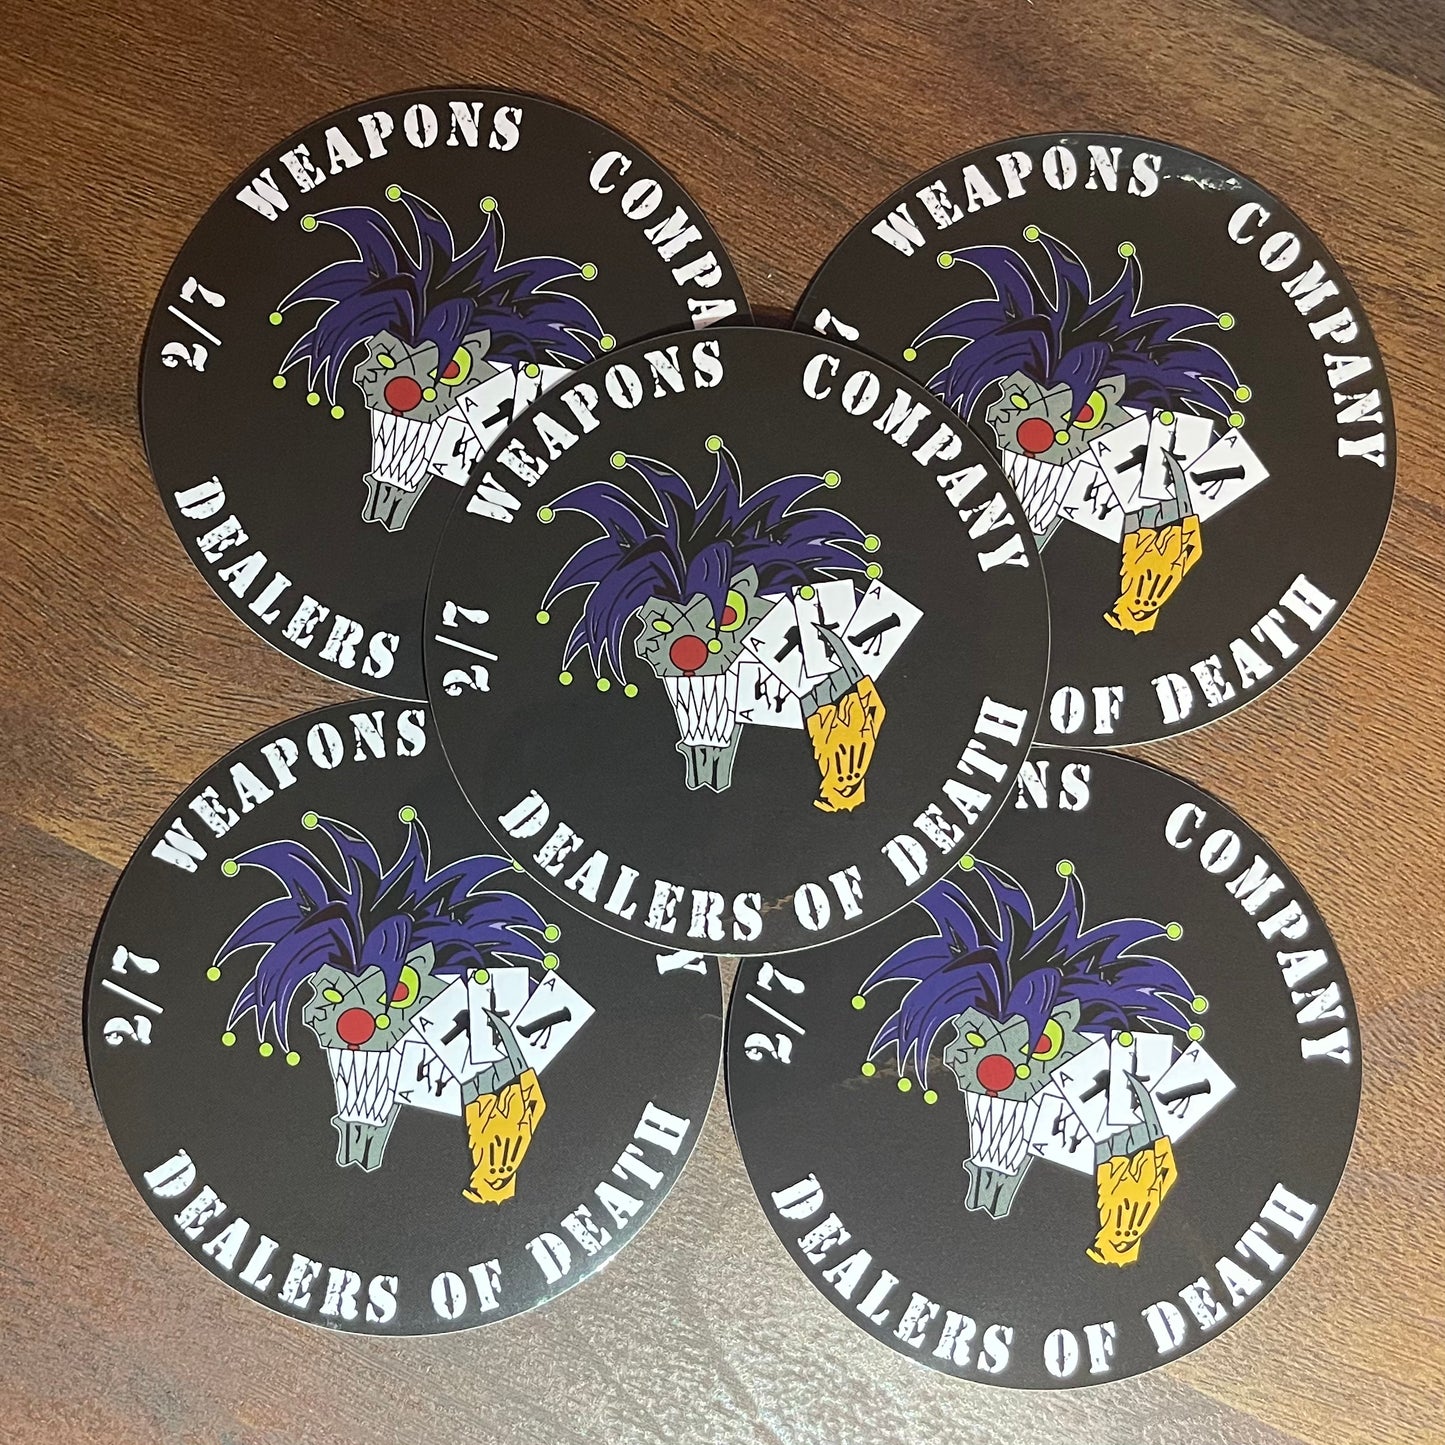 2/7 Weapons Company Dealers of Death Stickers - 5 pack